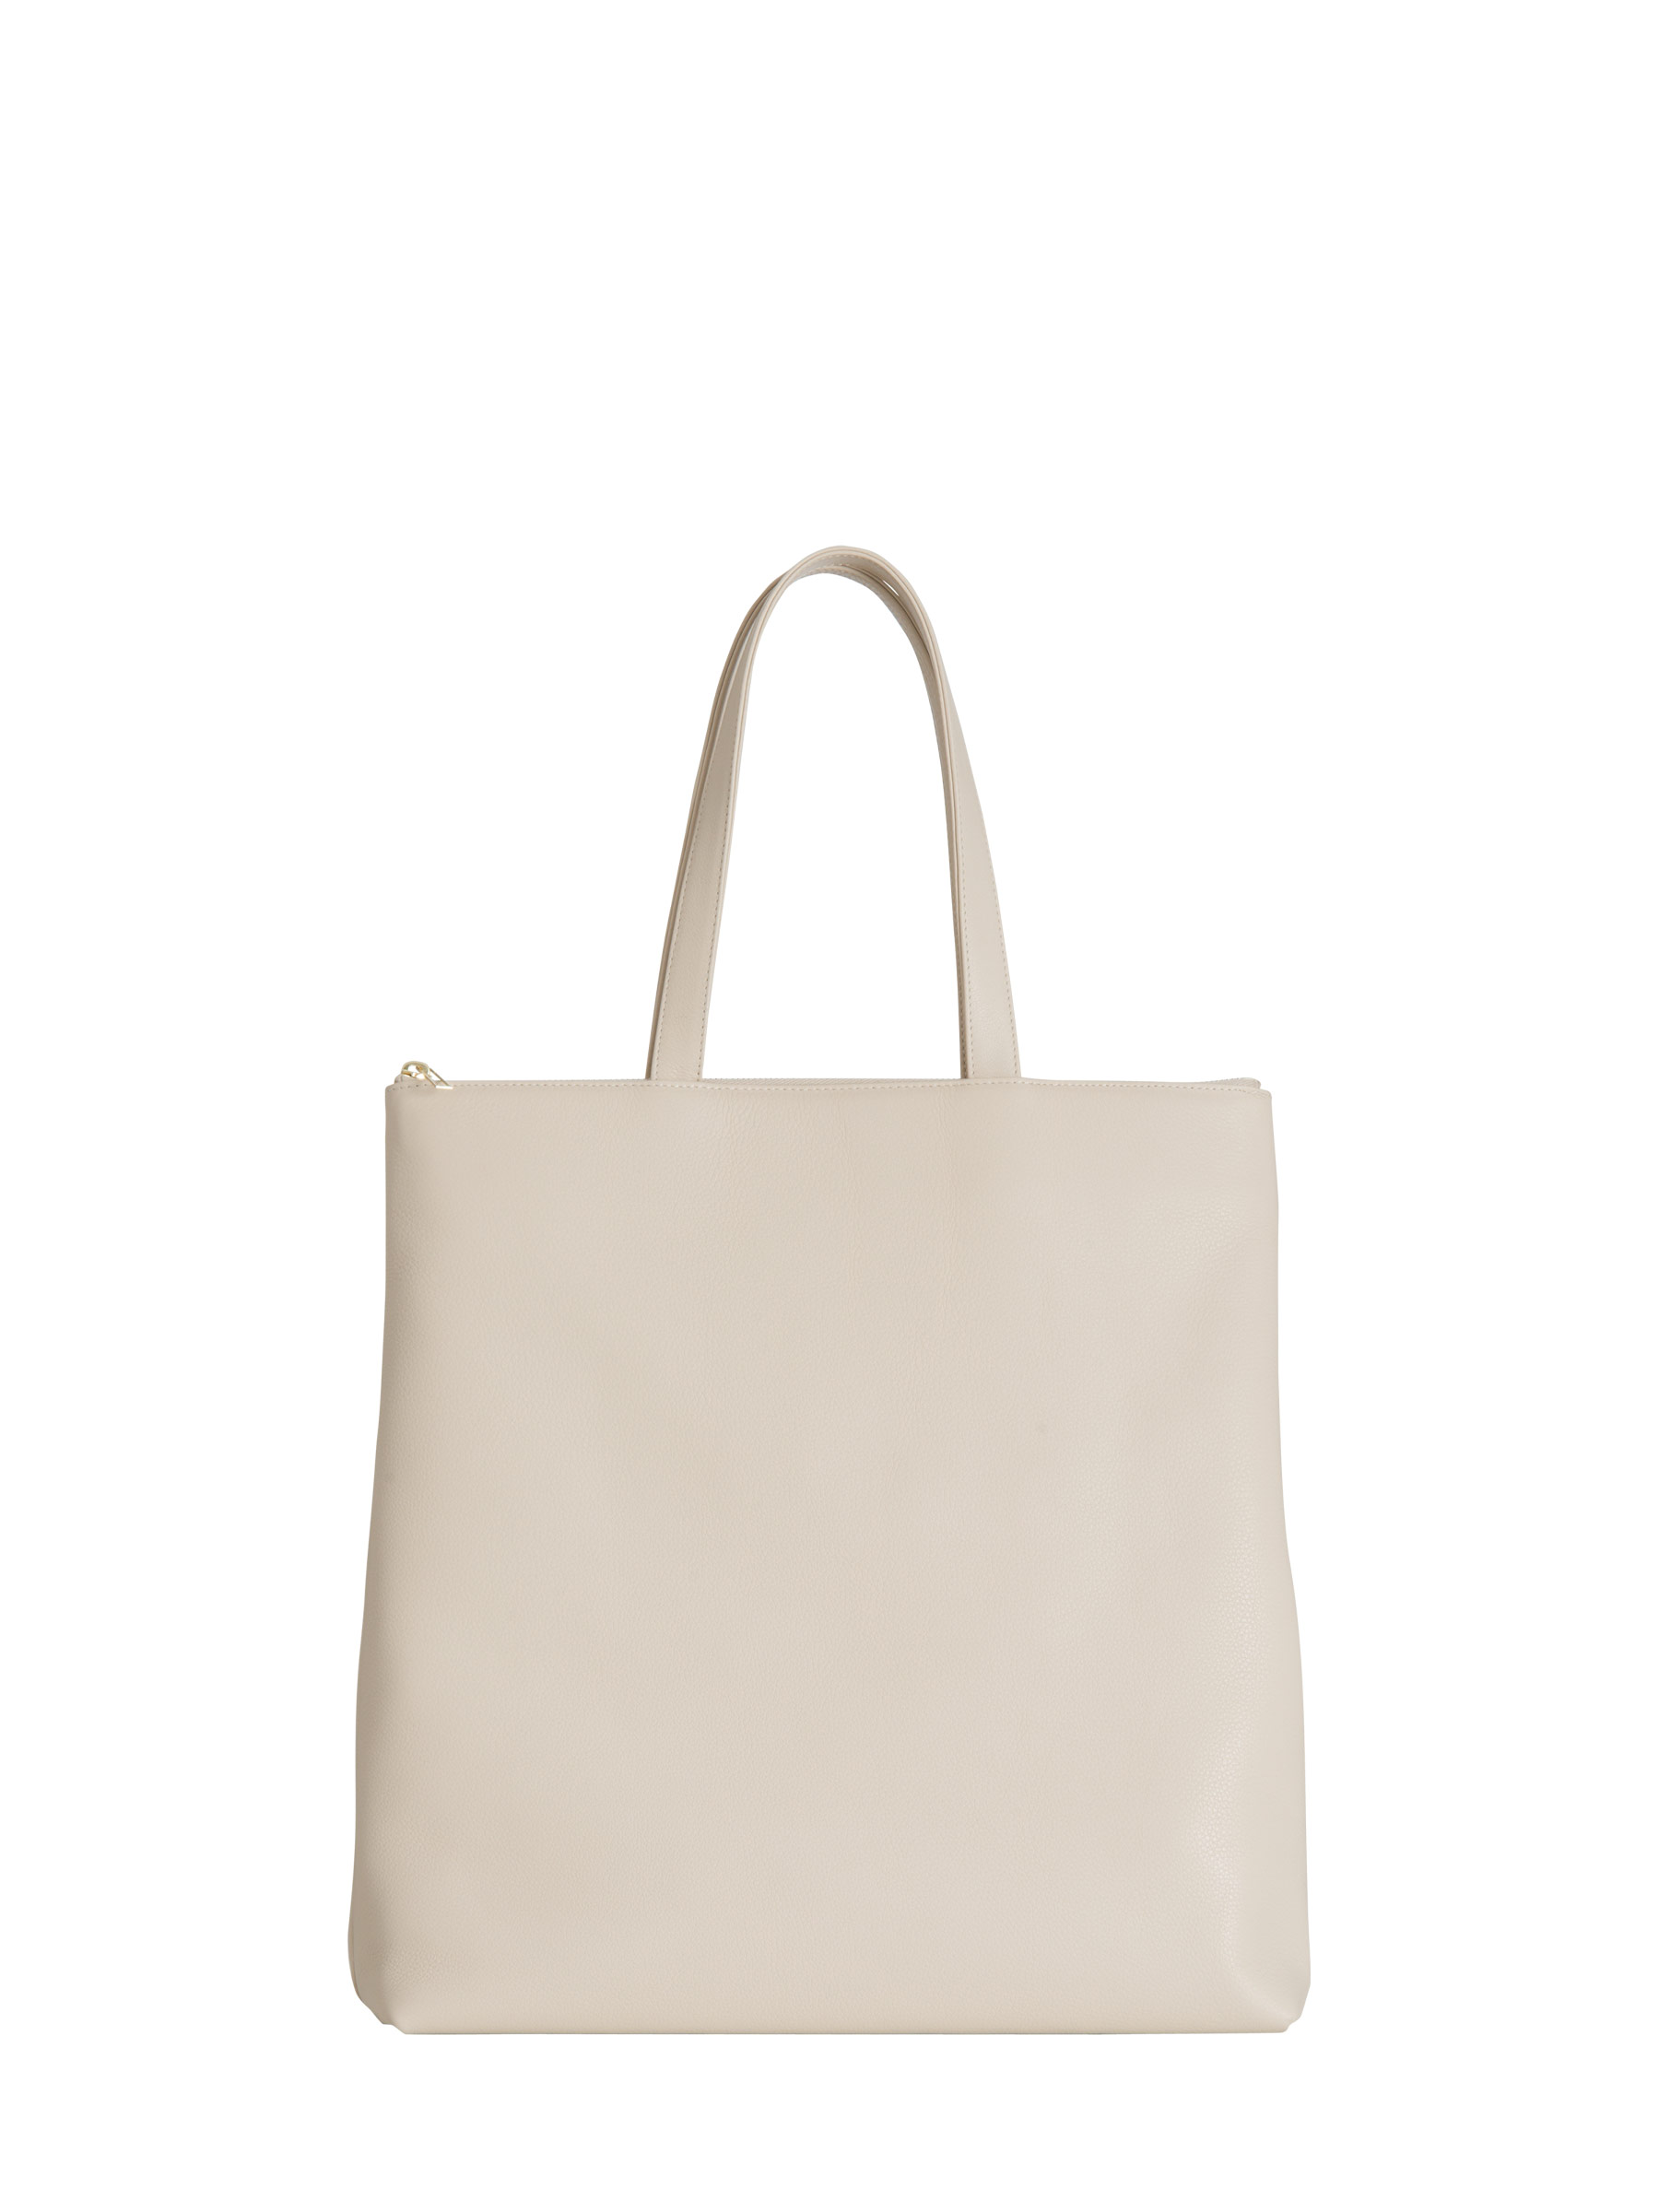 LUCID L tote bag in ivory calfskin leather | TSATSAS